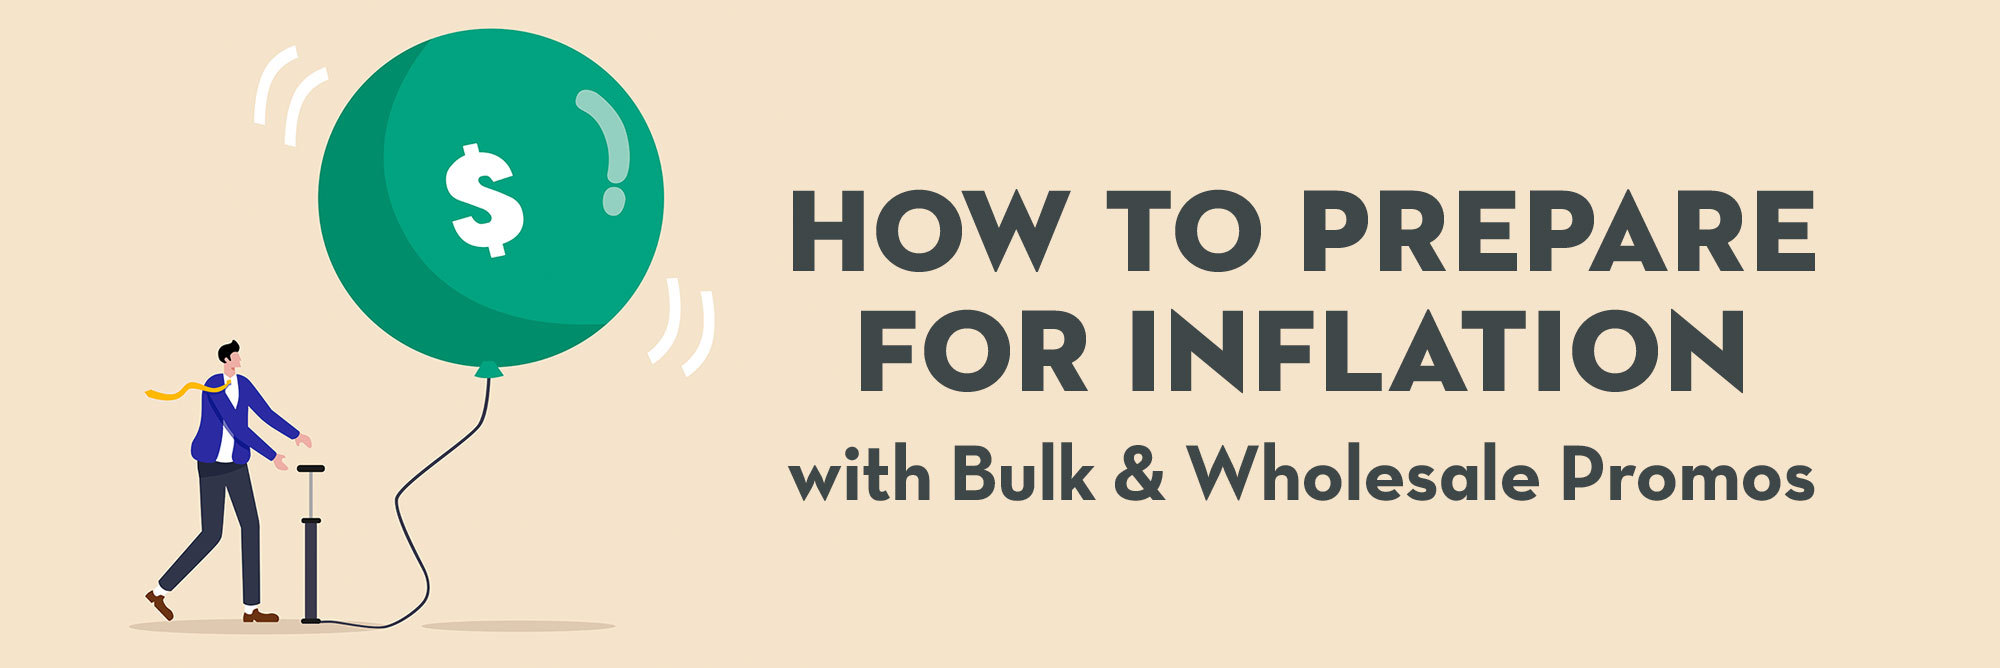 How to Prepare for Inflation with Bulk & Wholesale Promotional Products